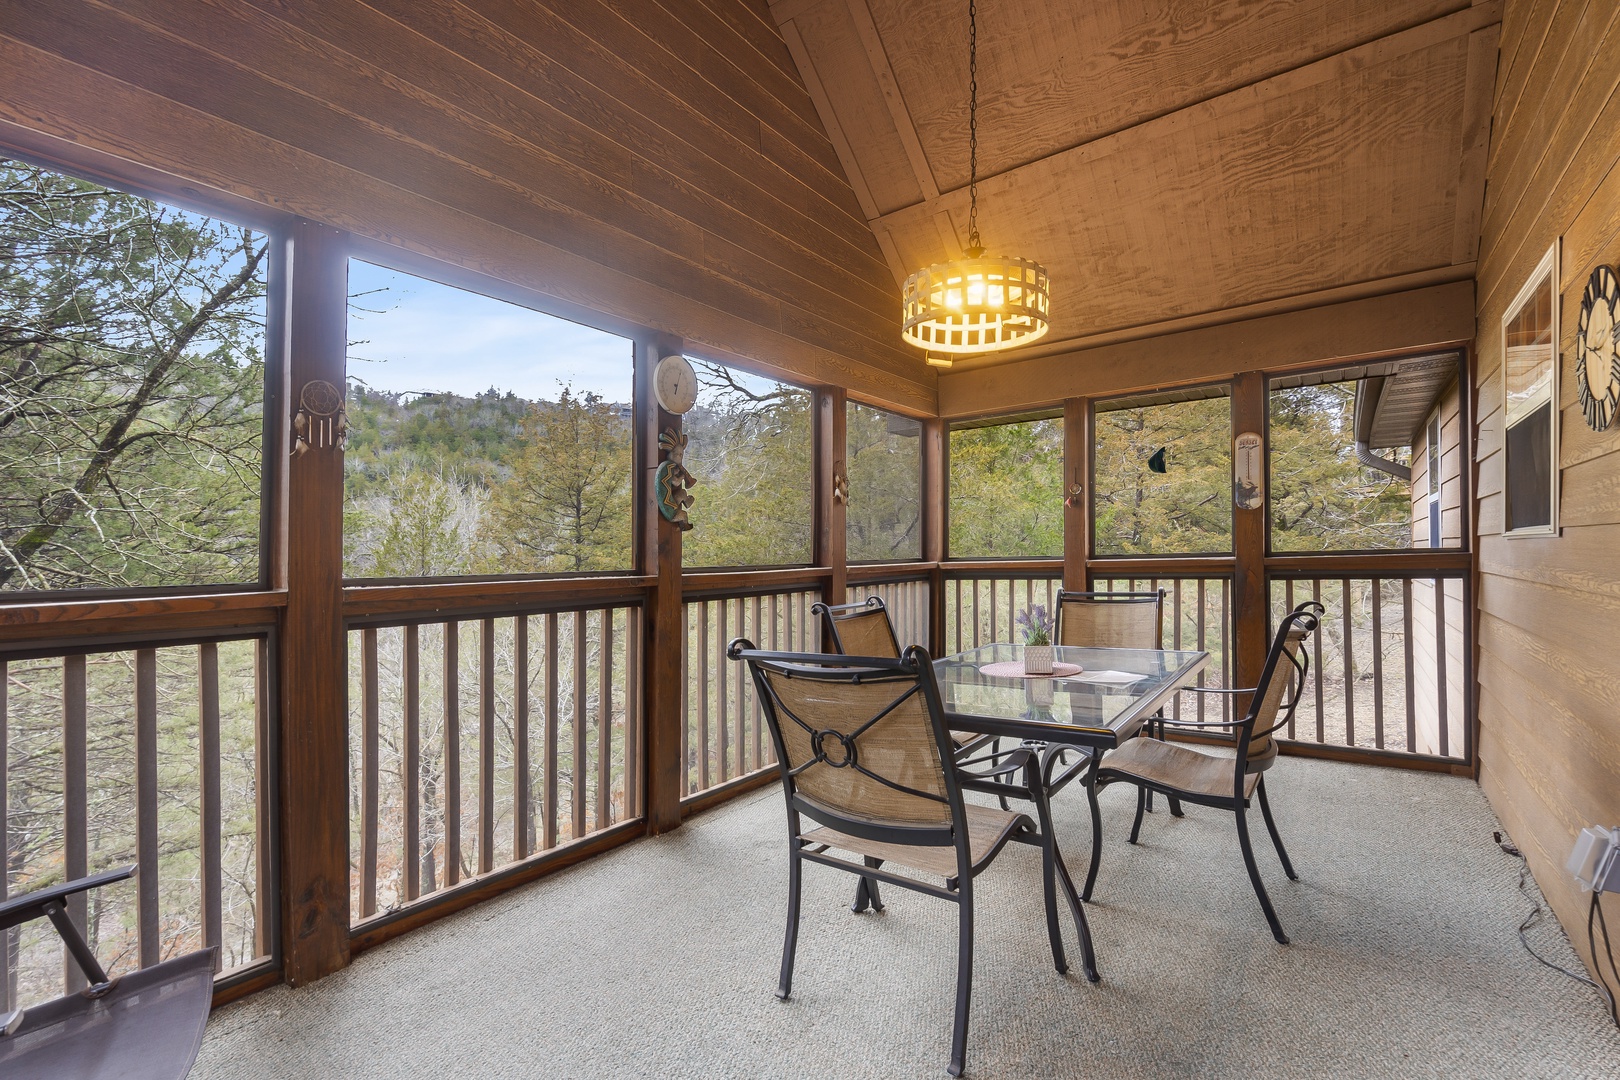 Marvel at the majestic mountain view from the upper screened deck